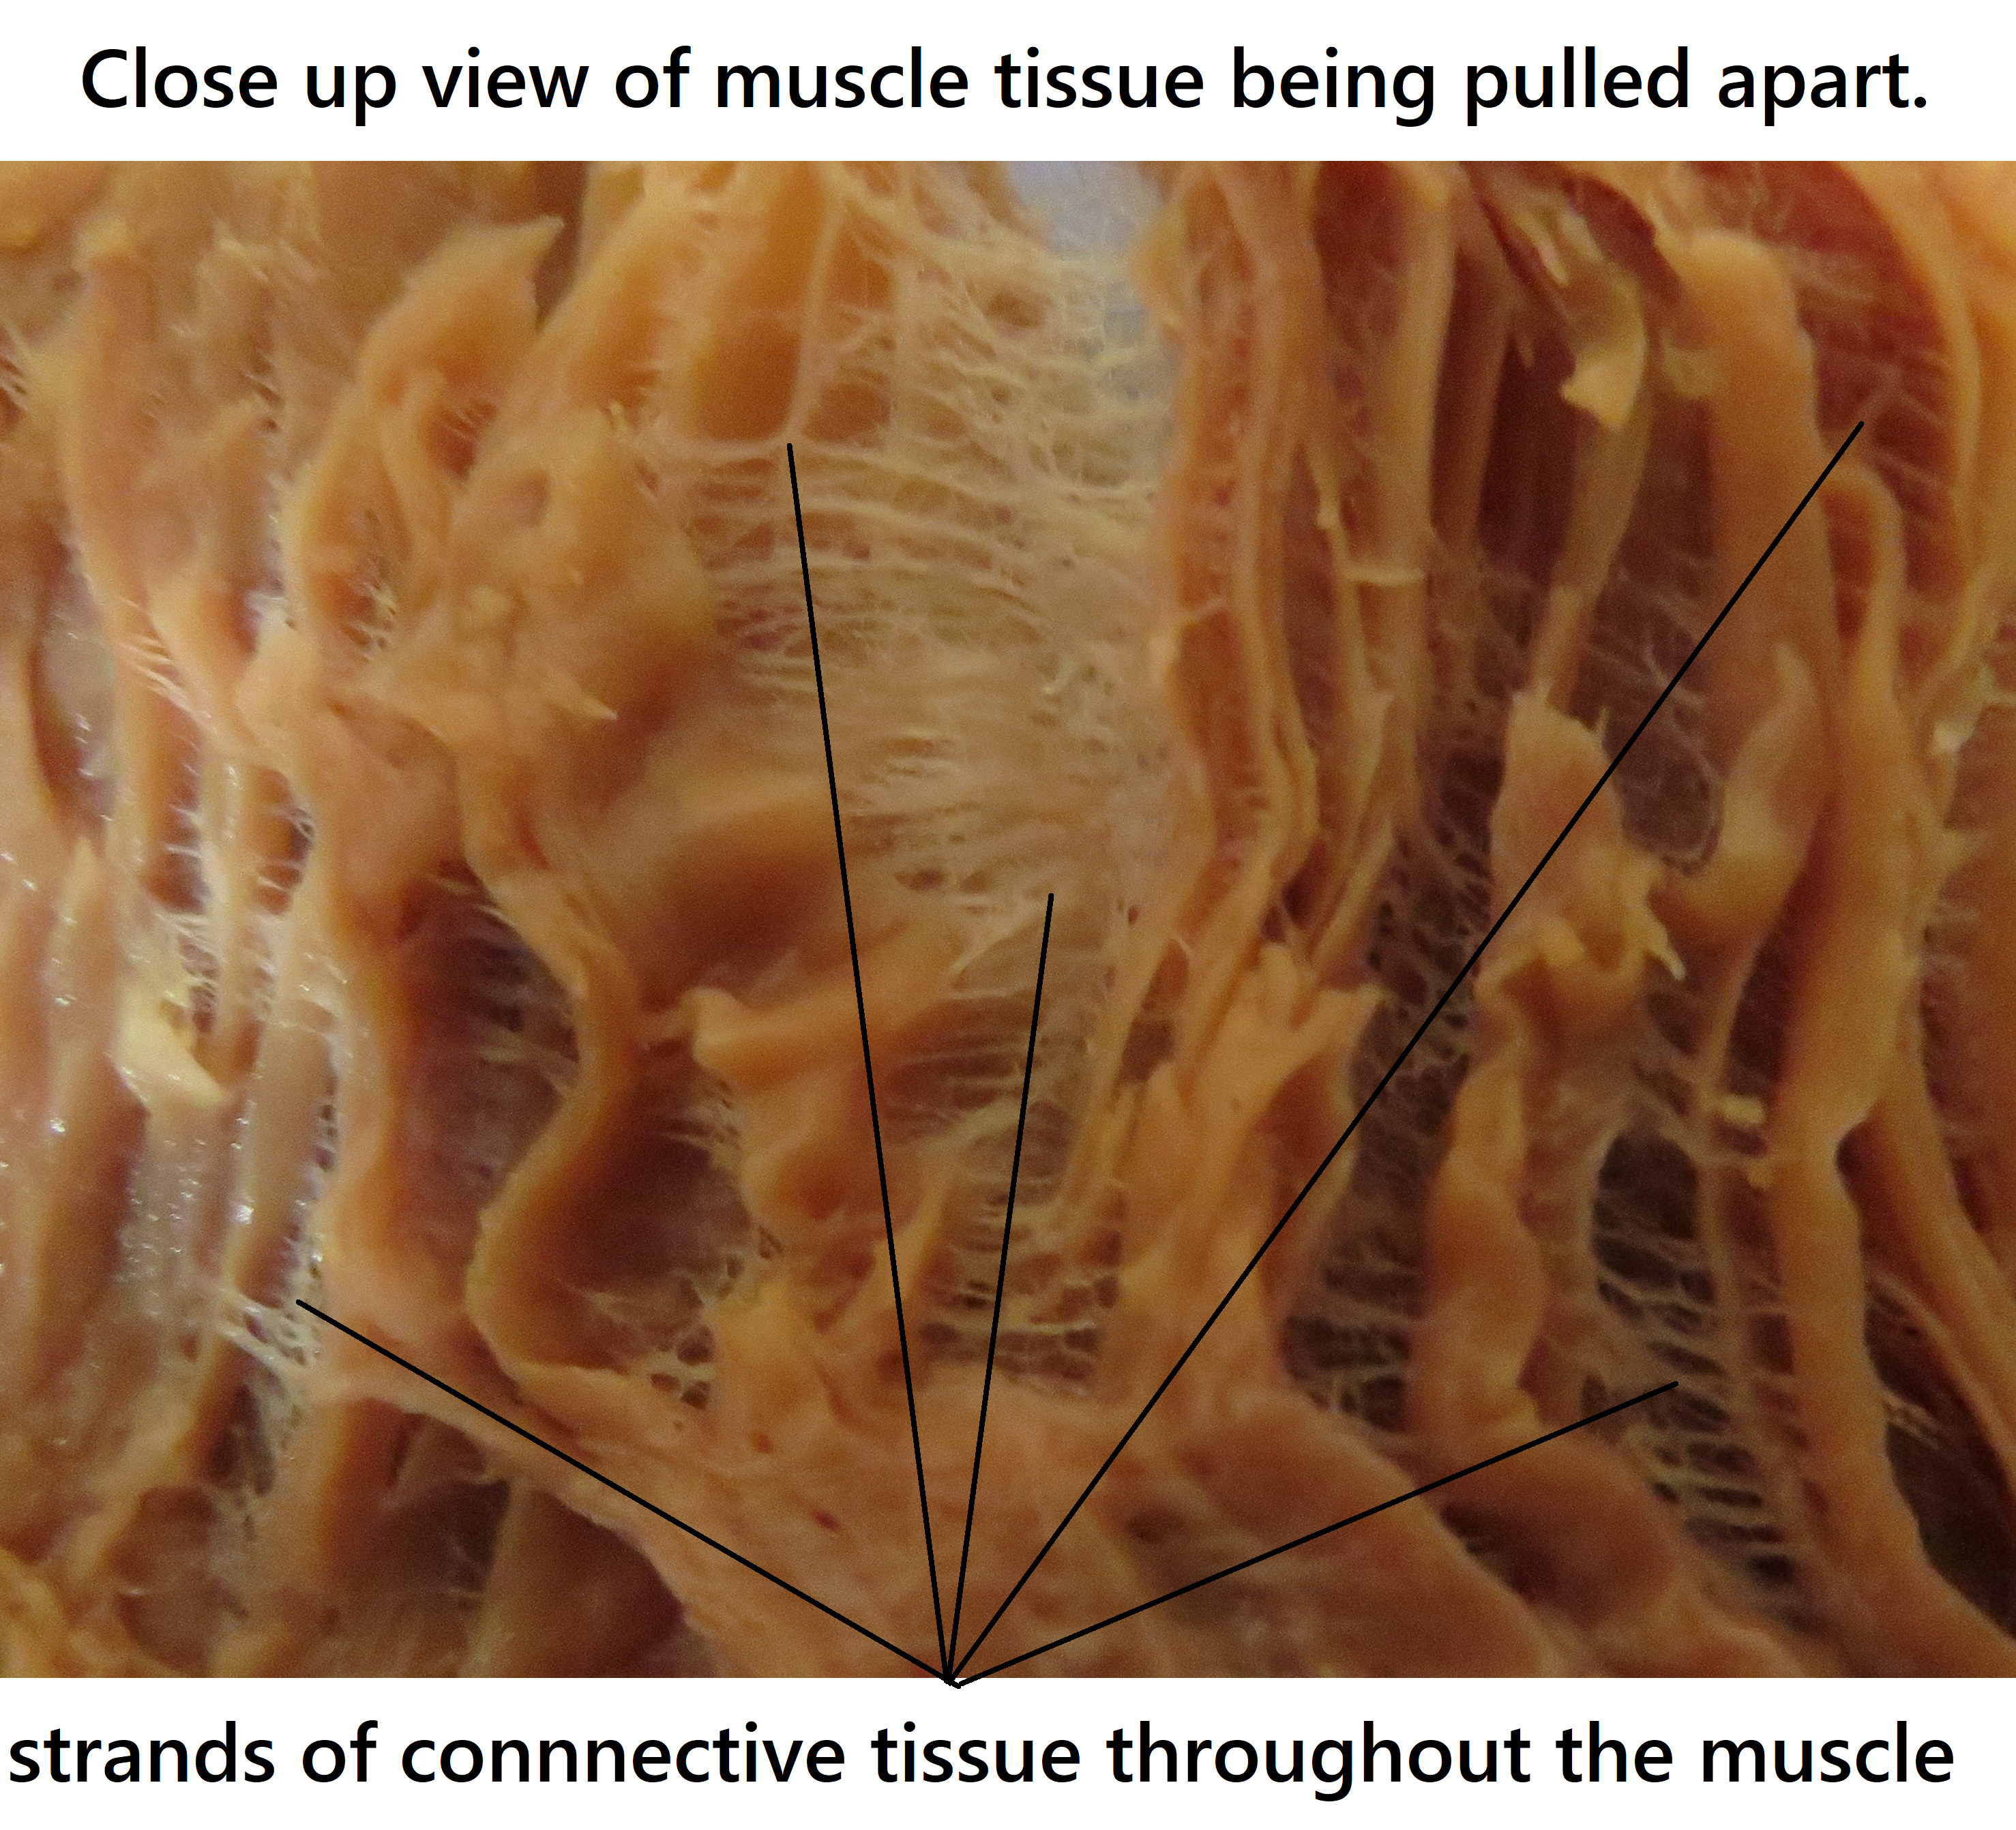 muscle tissue pulled apart showing the strands of connective tissue that are throughout it.